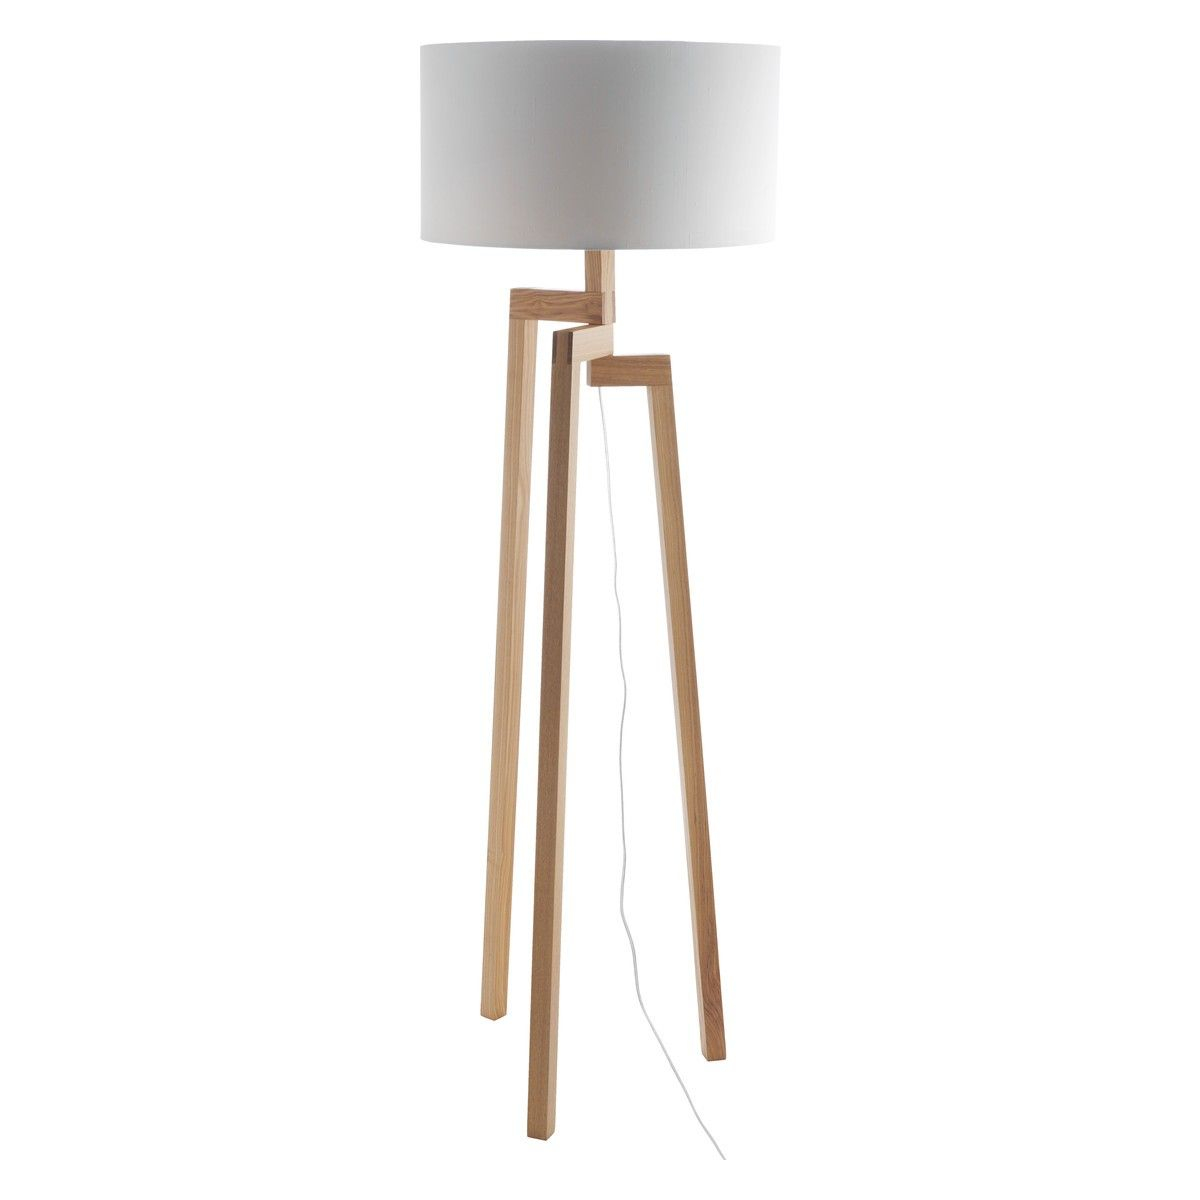 Dylan Wooden Floor Lamp With White Shade House Wooden regarding dimensions 1200 X 1200